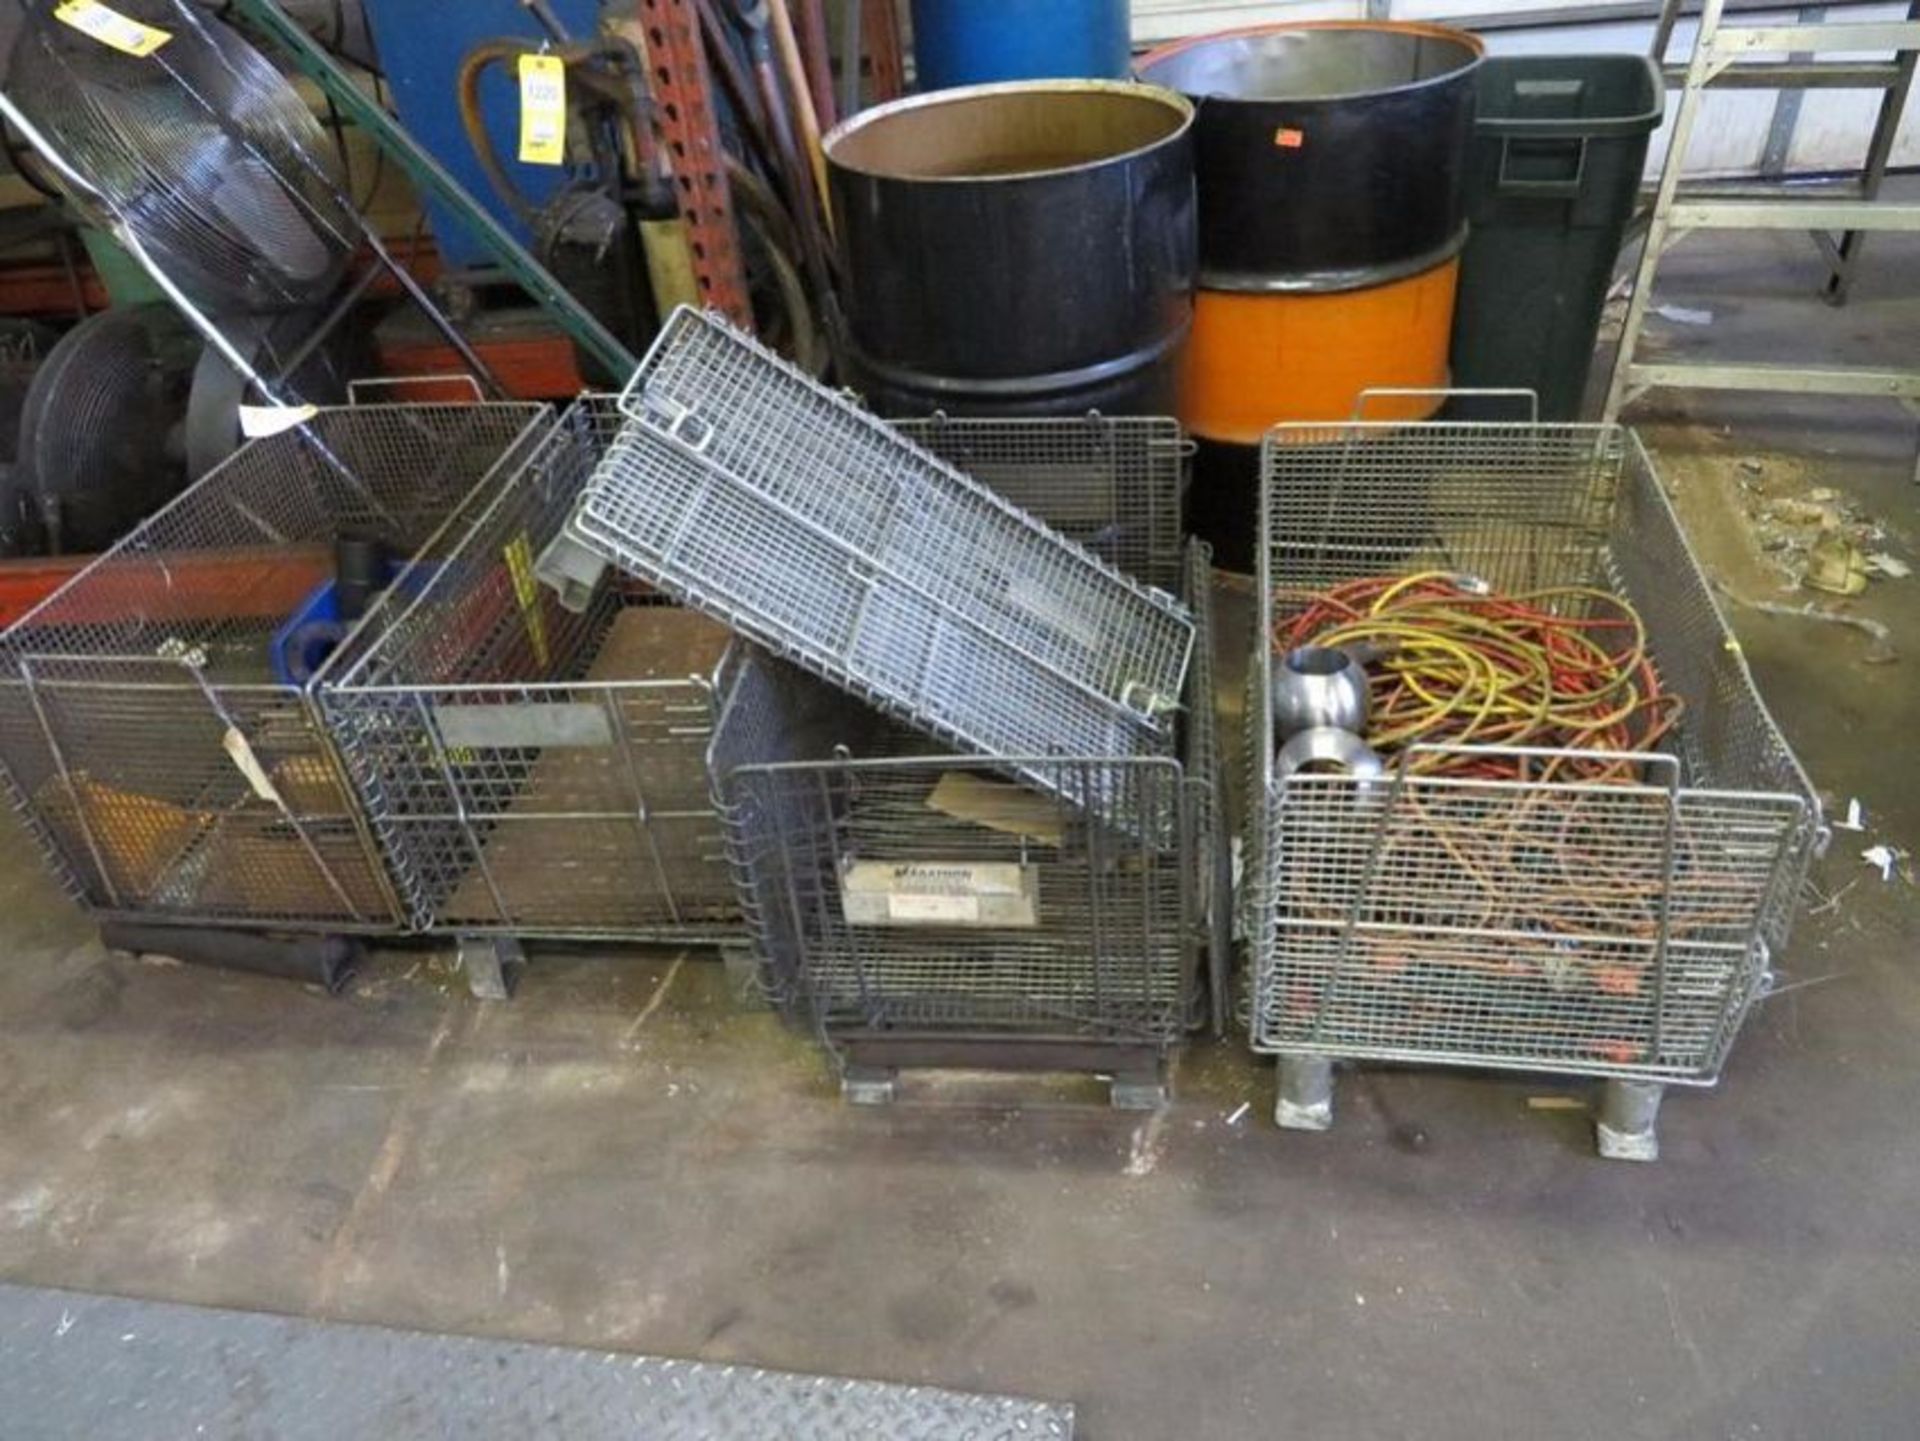 LOT: Assorted Extension Cords in (5) Wire Baskets (Building #1)